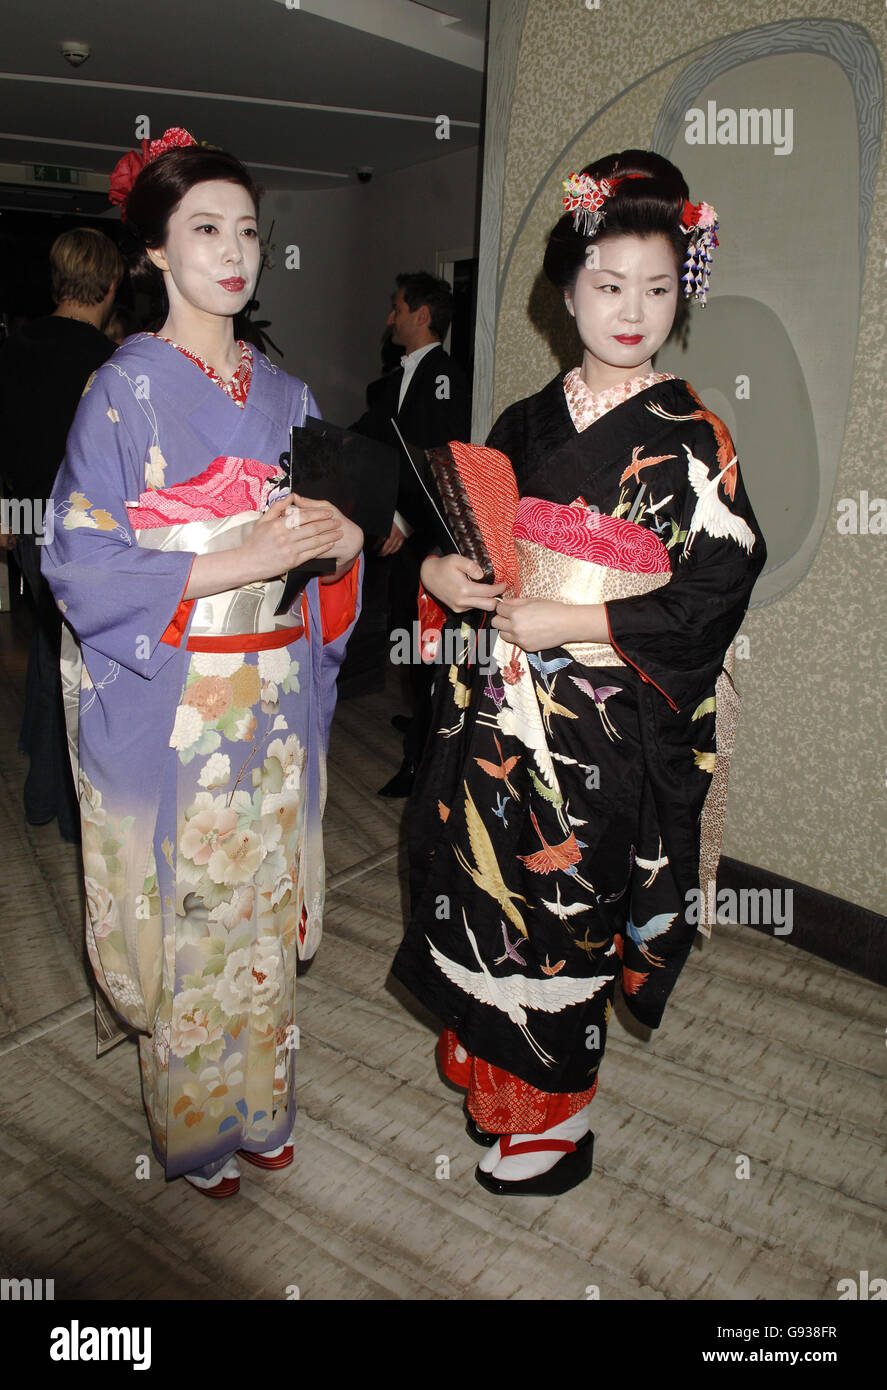 Geishas attend the party following the UK film premiere of 'Memoirs Of A Geisha', from NOBU, Berkeley Square, central London, Wednesday 11 January 2006. PRESS ASSOCIATION Photo. Photo credit should read: Yui Mok/PA Stock Photo